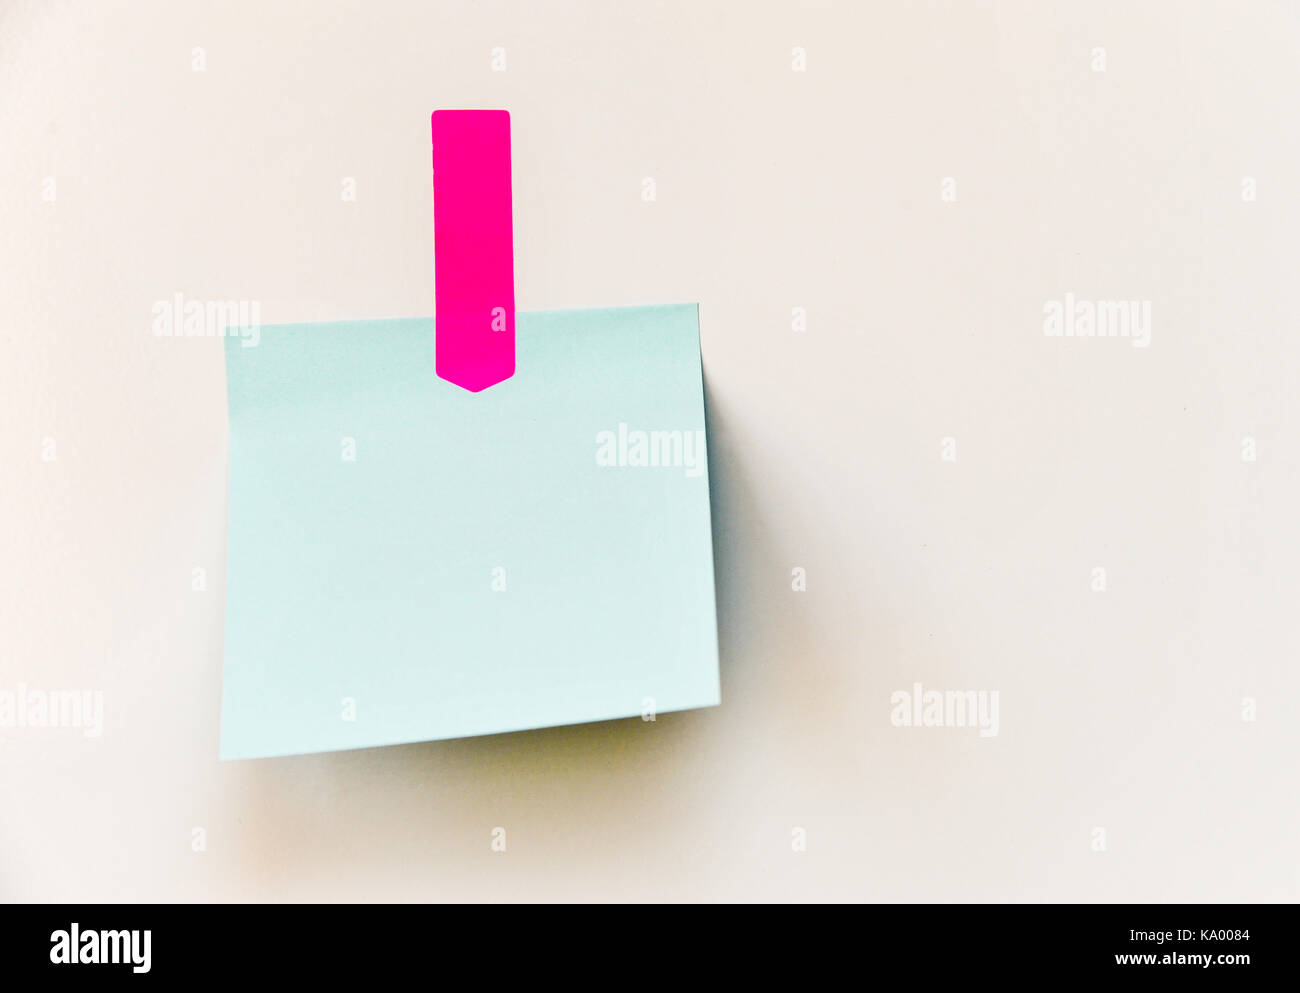 Blank Stickies or Post-It Notes Stuck to a Fridge. Stock Photo